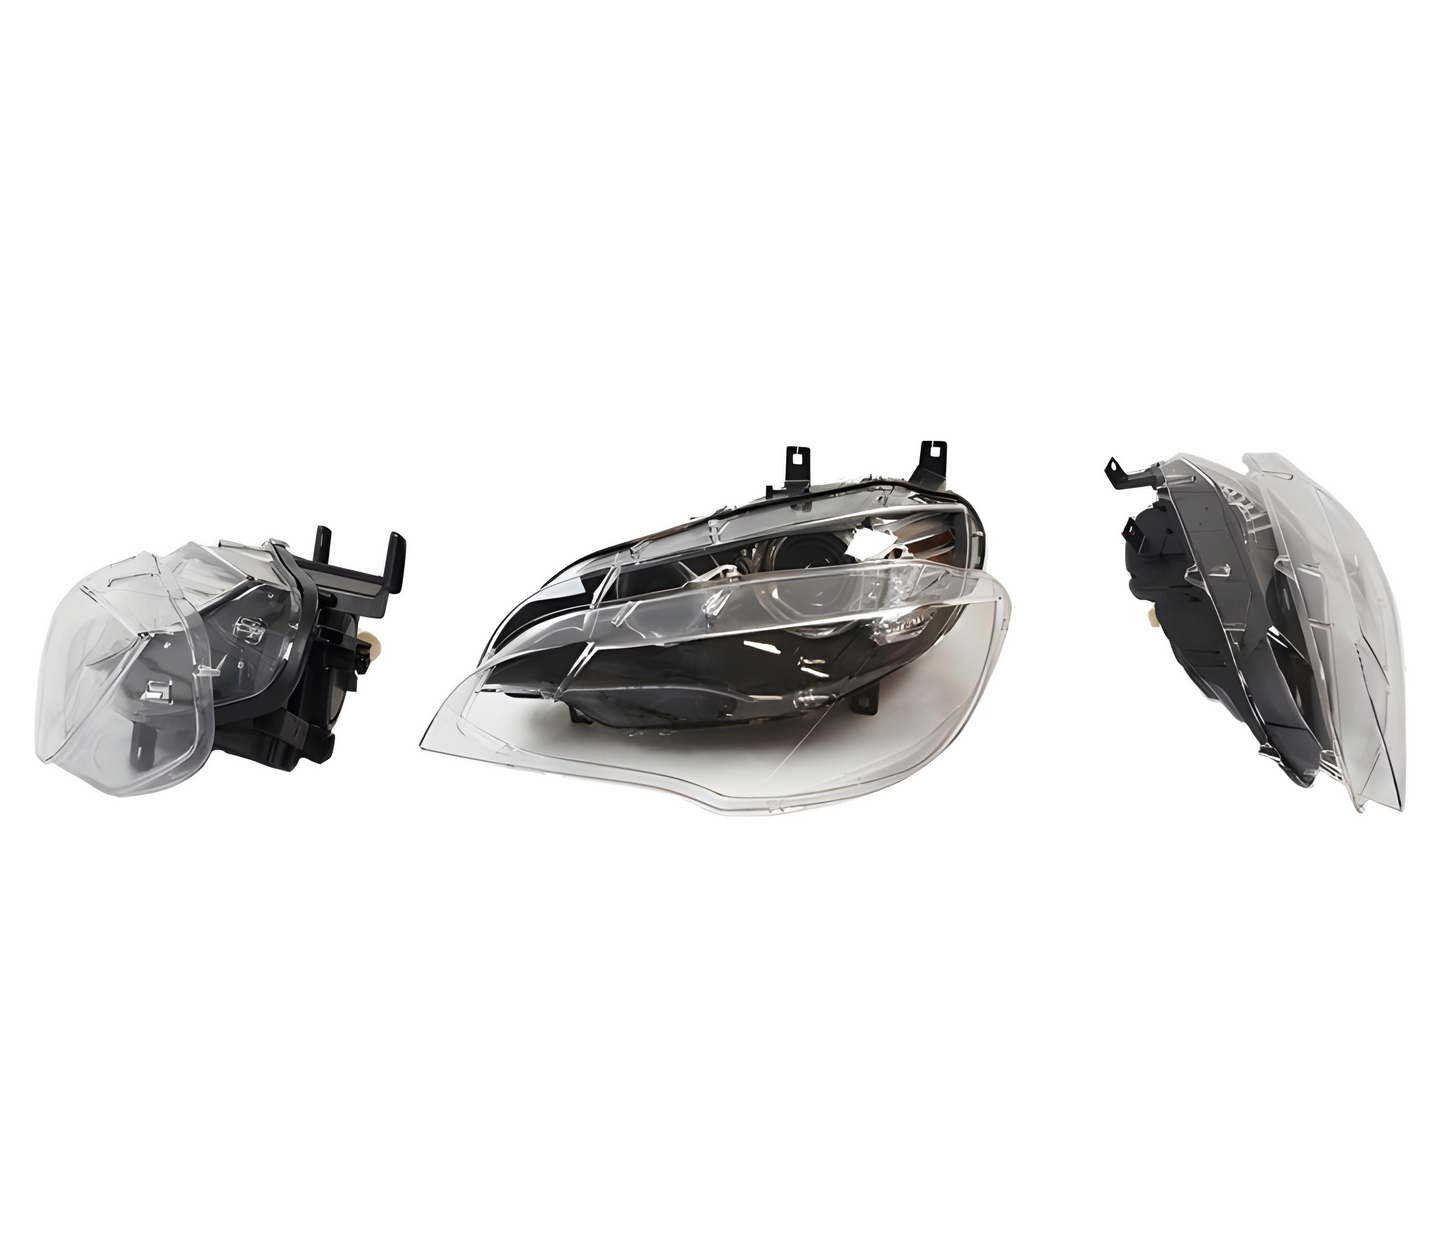 Headlight Lens covers for BMW 6 F06 F12 F13 (2015-2018) Facelift